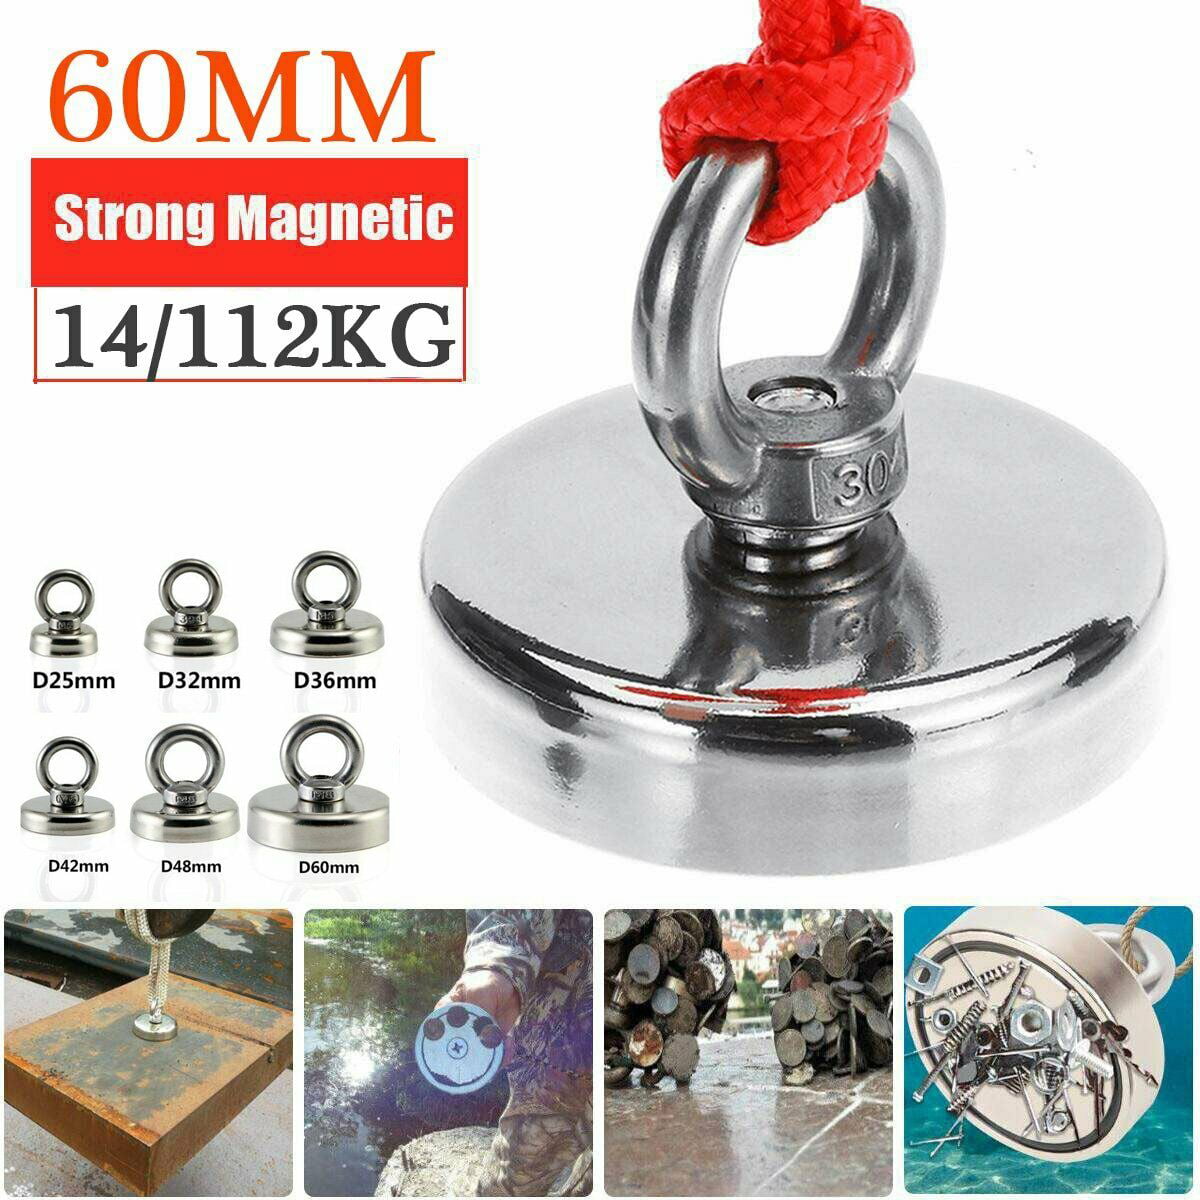 TREASURE HUNTING WITH EYELET D48mm NEODYMIUM VERY STRONG MAGNET WATER FISHING 